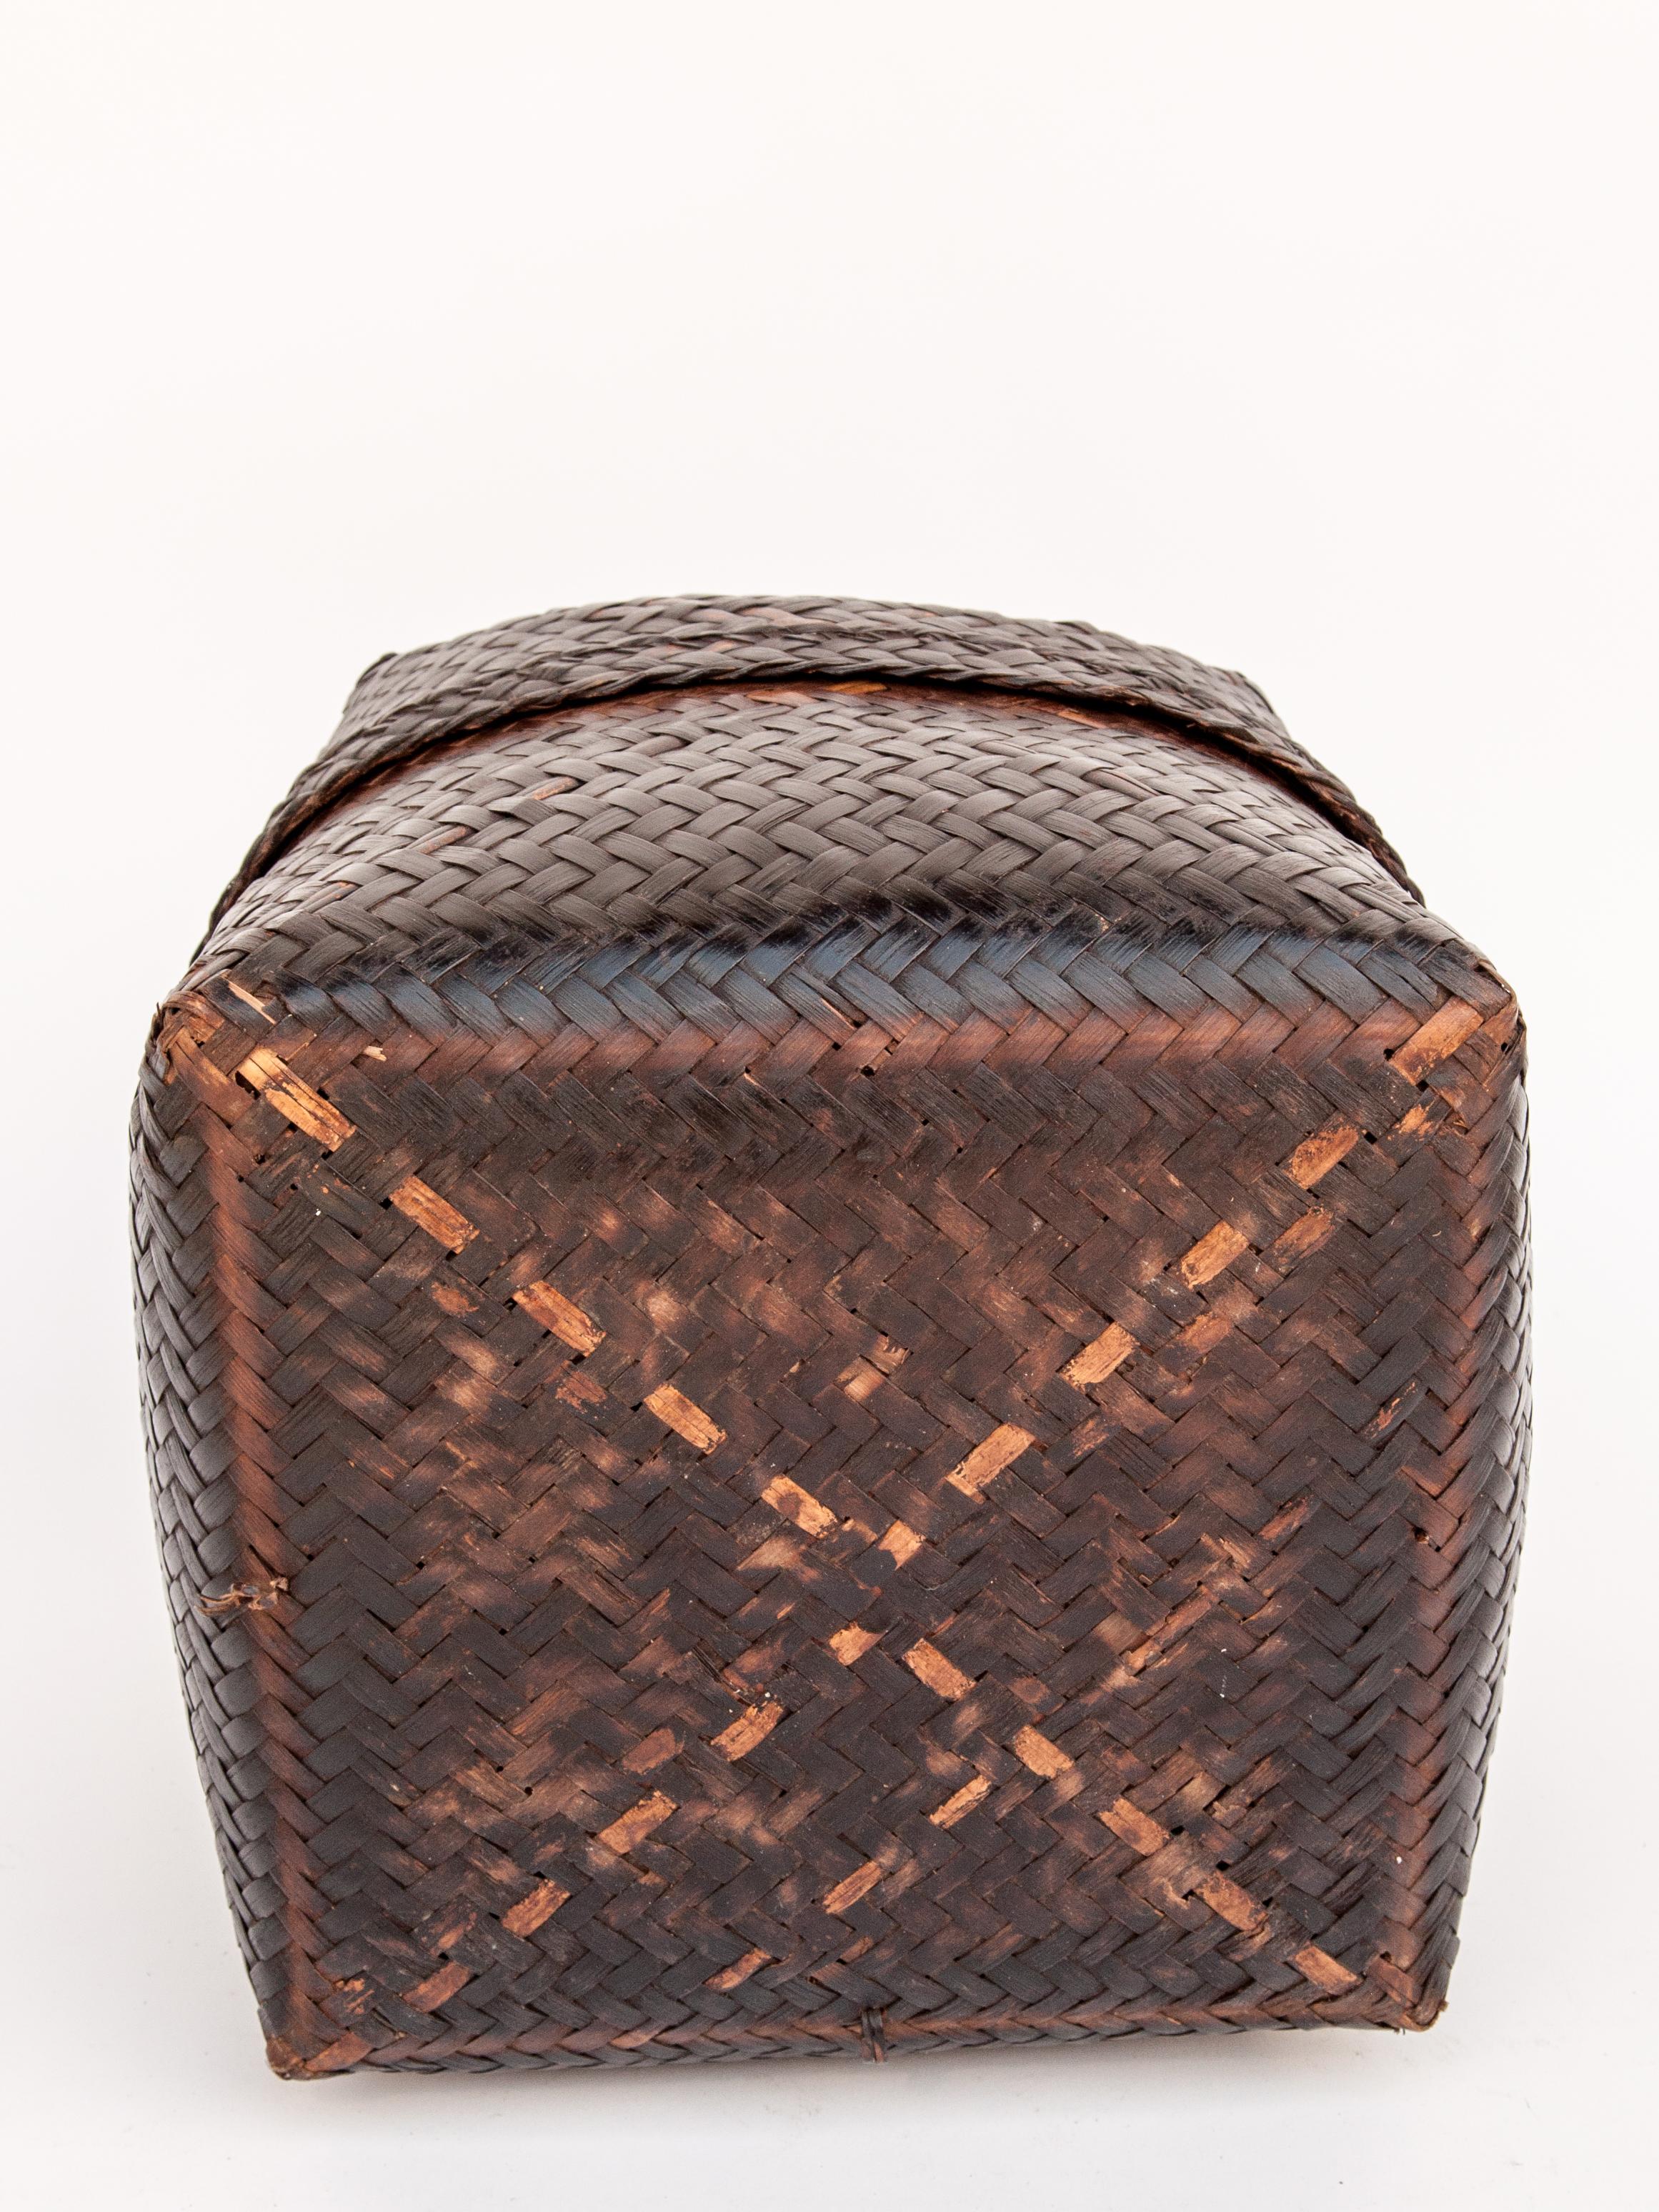 Vintage Bamboo Storage Basket with Lid Lombok, Indonesia, Mid-Late 20th Century 13